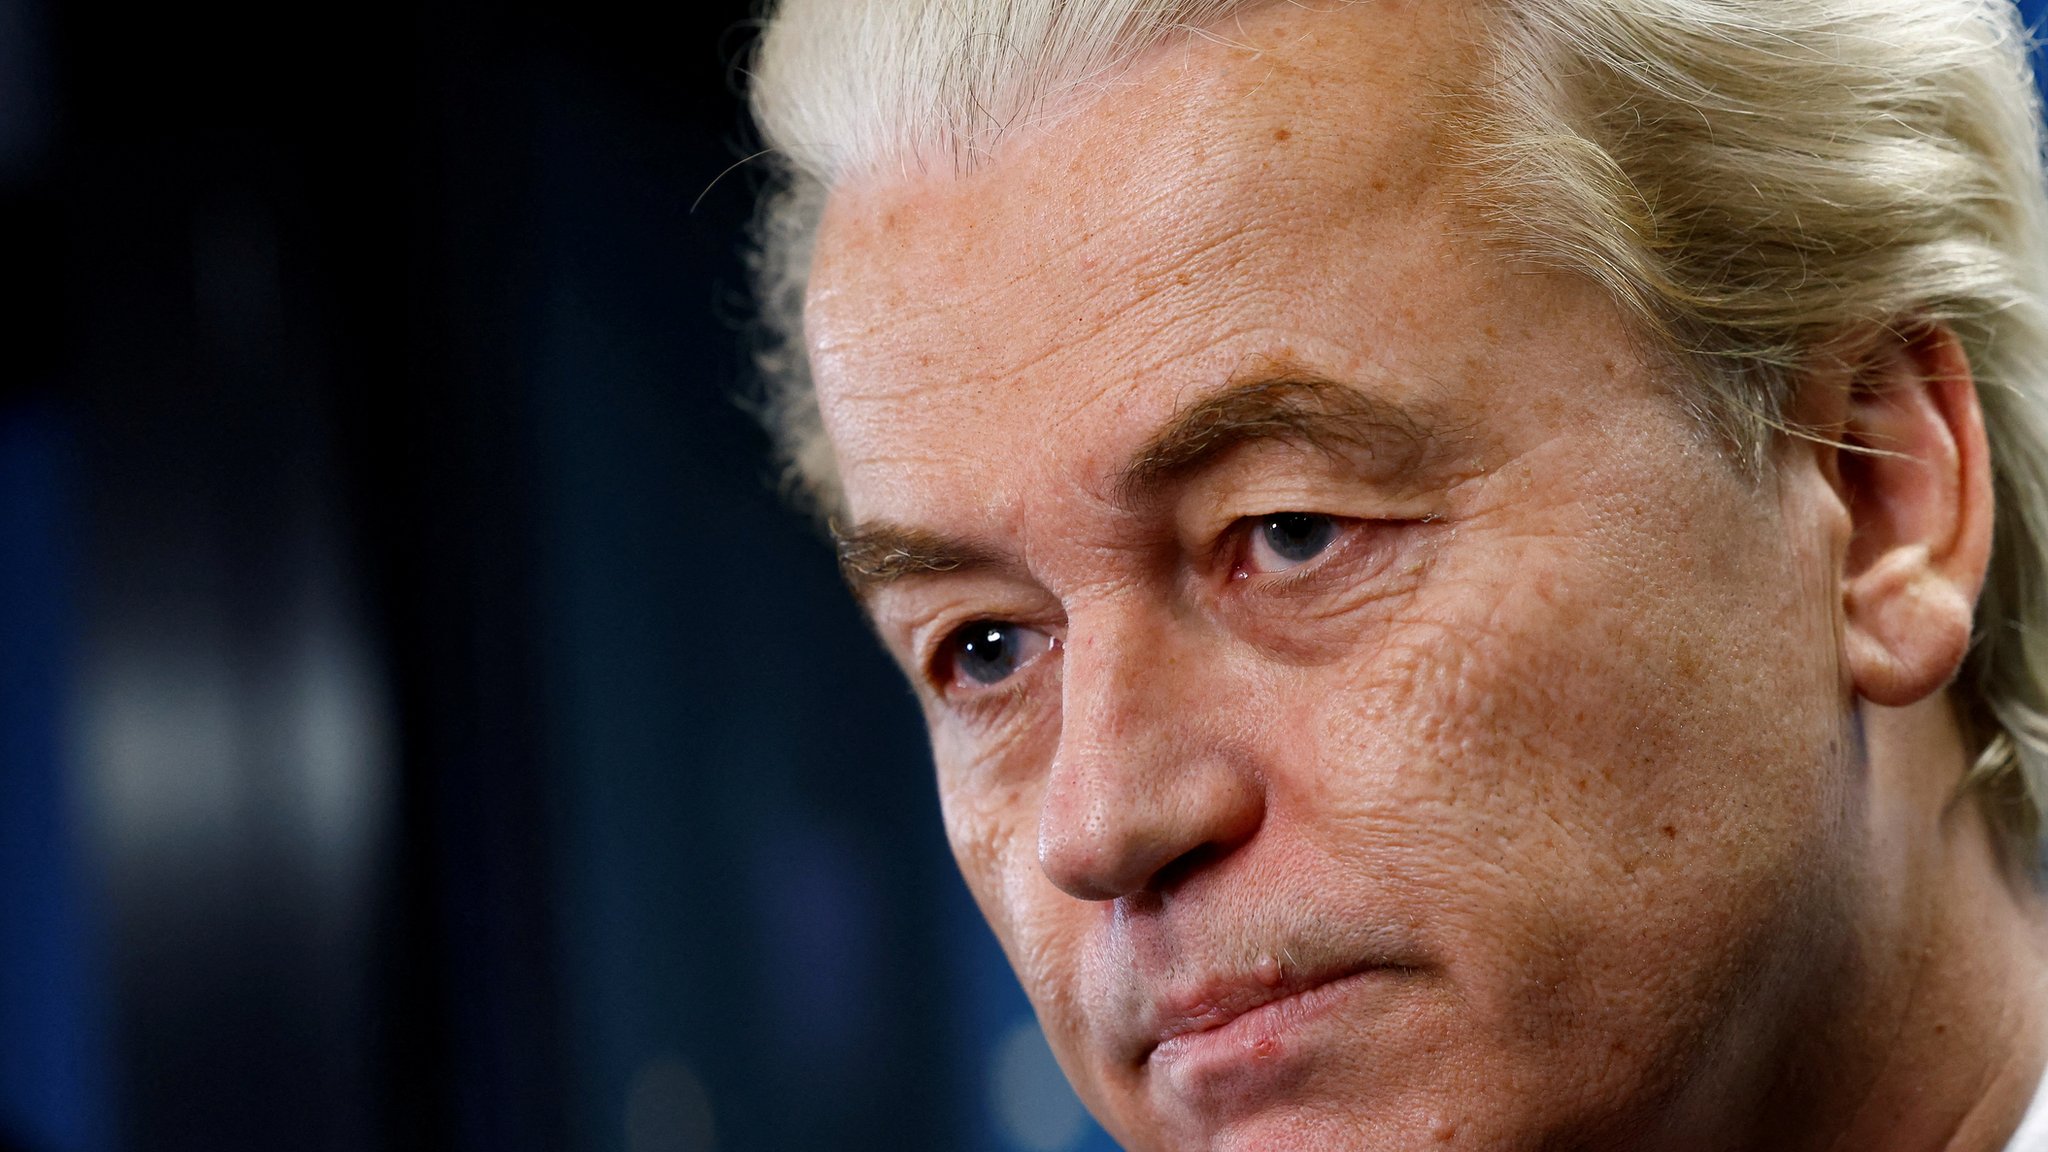 Key Dutch party sees no basis for talks with Wilders